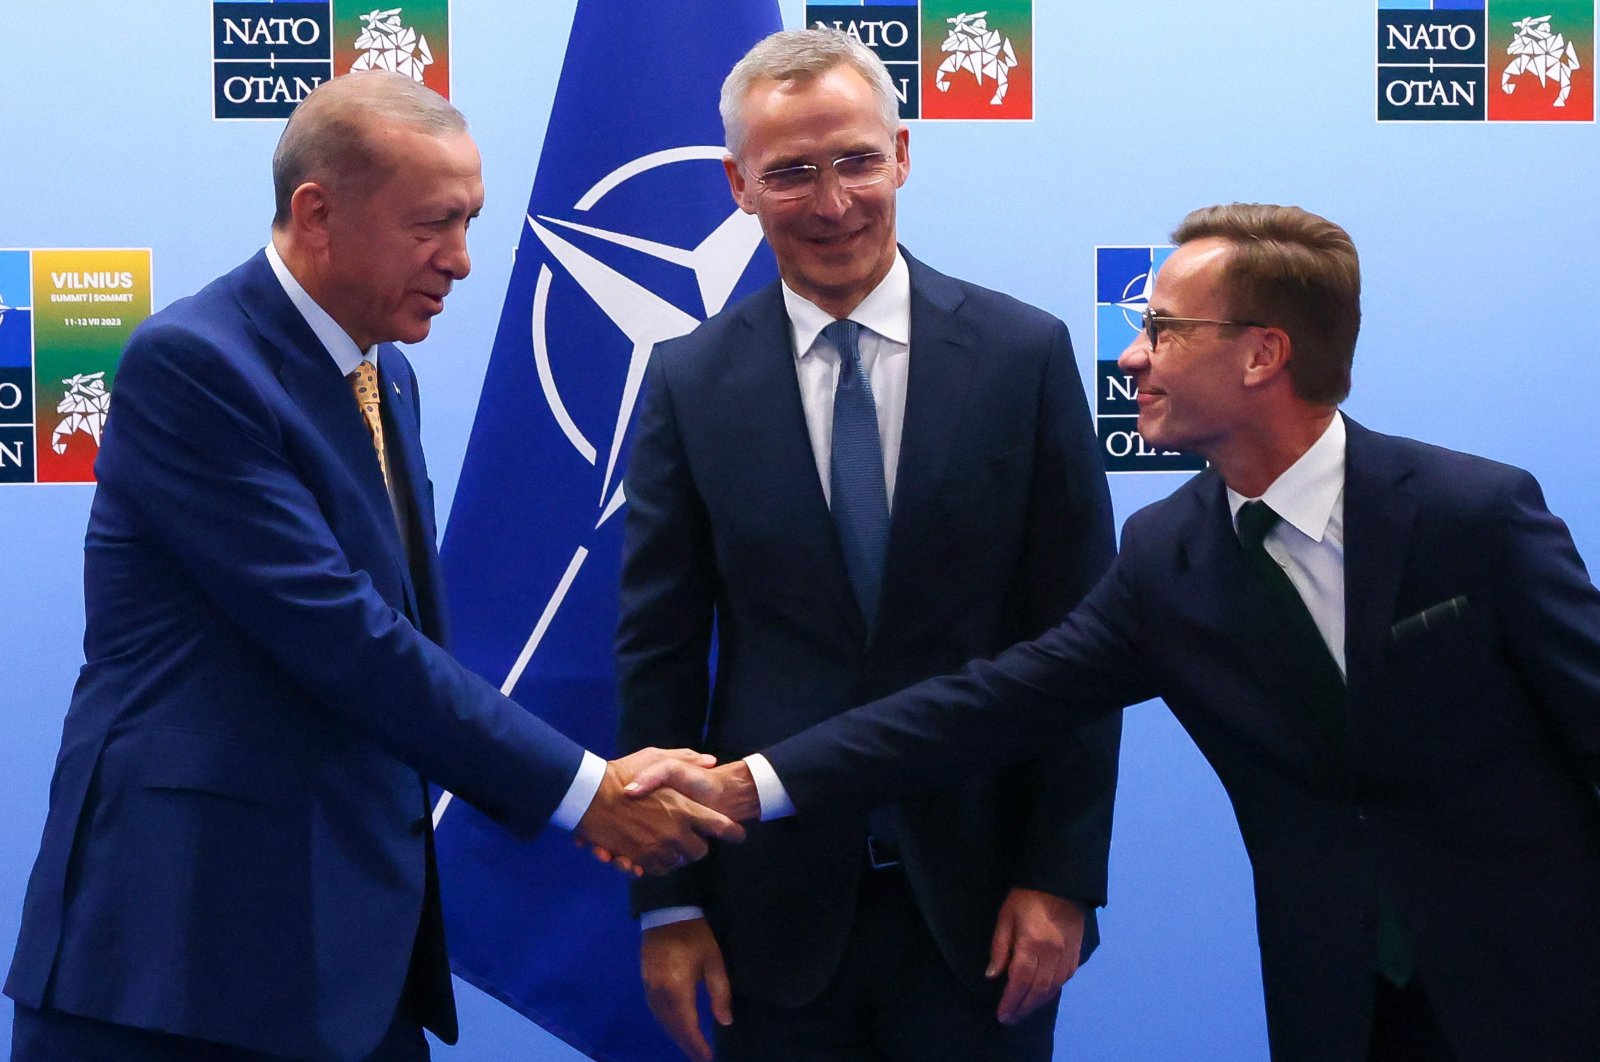 President Recep Tayyip Erdoğan (L) and Swedish Prime Minister Ulf Kristersson (R) shake hands in front of NATO Secretary-General Jens Stoltenberg (C) prior to their meeting, on the eve of a NATO summit, Vilnius, Lithuania, July 10, 2023. (AFP Photo)